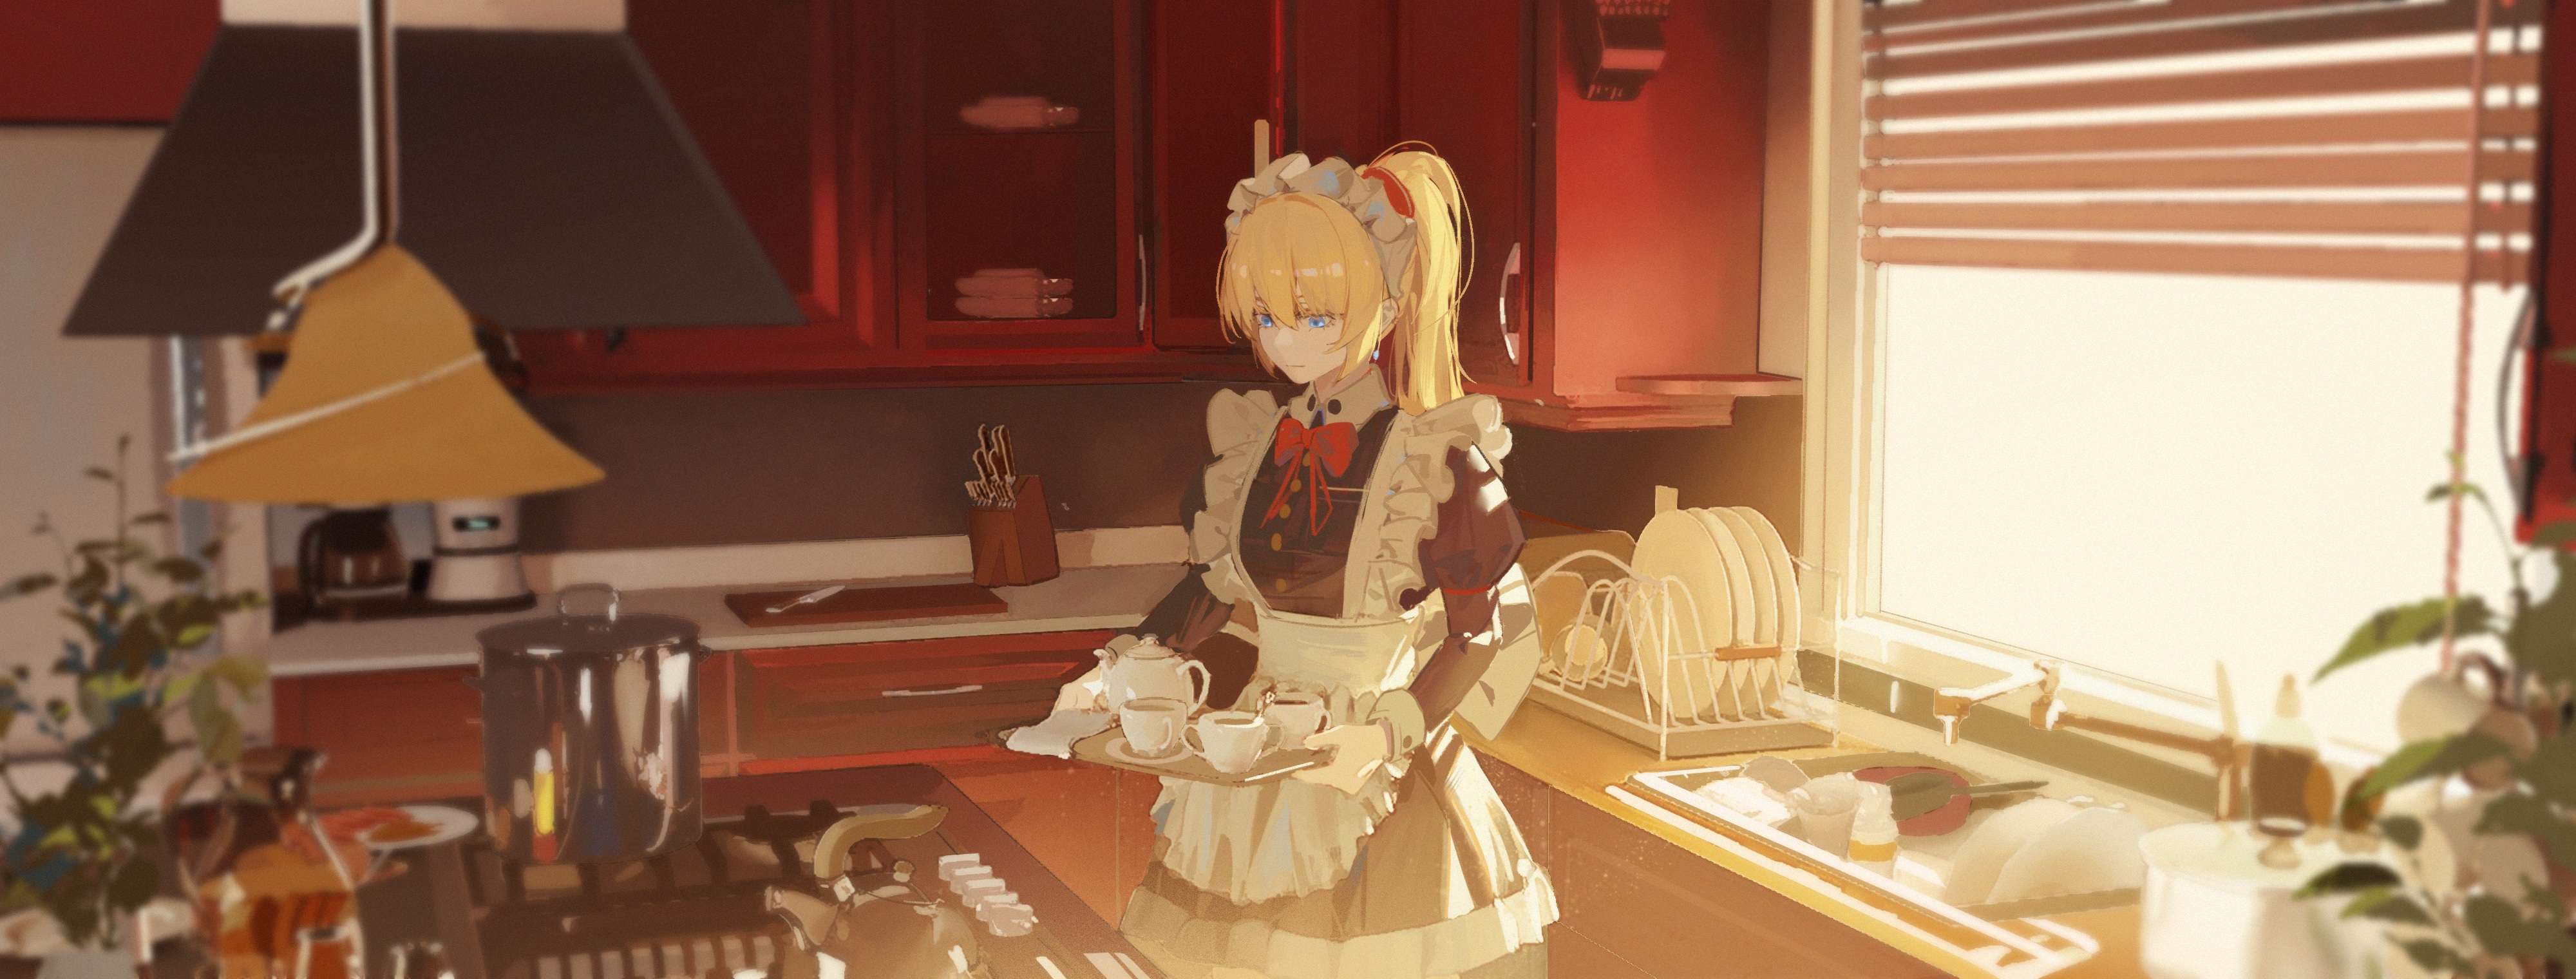 Anime 4000x1520 anime anime girls kitchen cup hotplate (Machine) pot (tools) women indoors blonde maid maid outfit sink Exhaust Hood